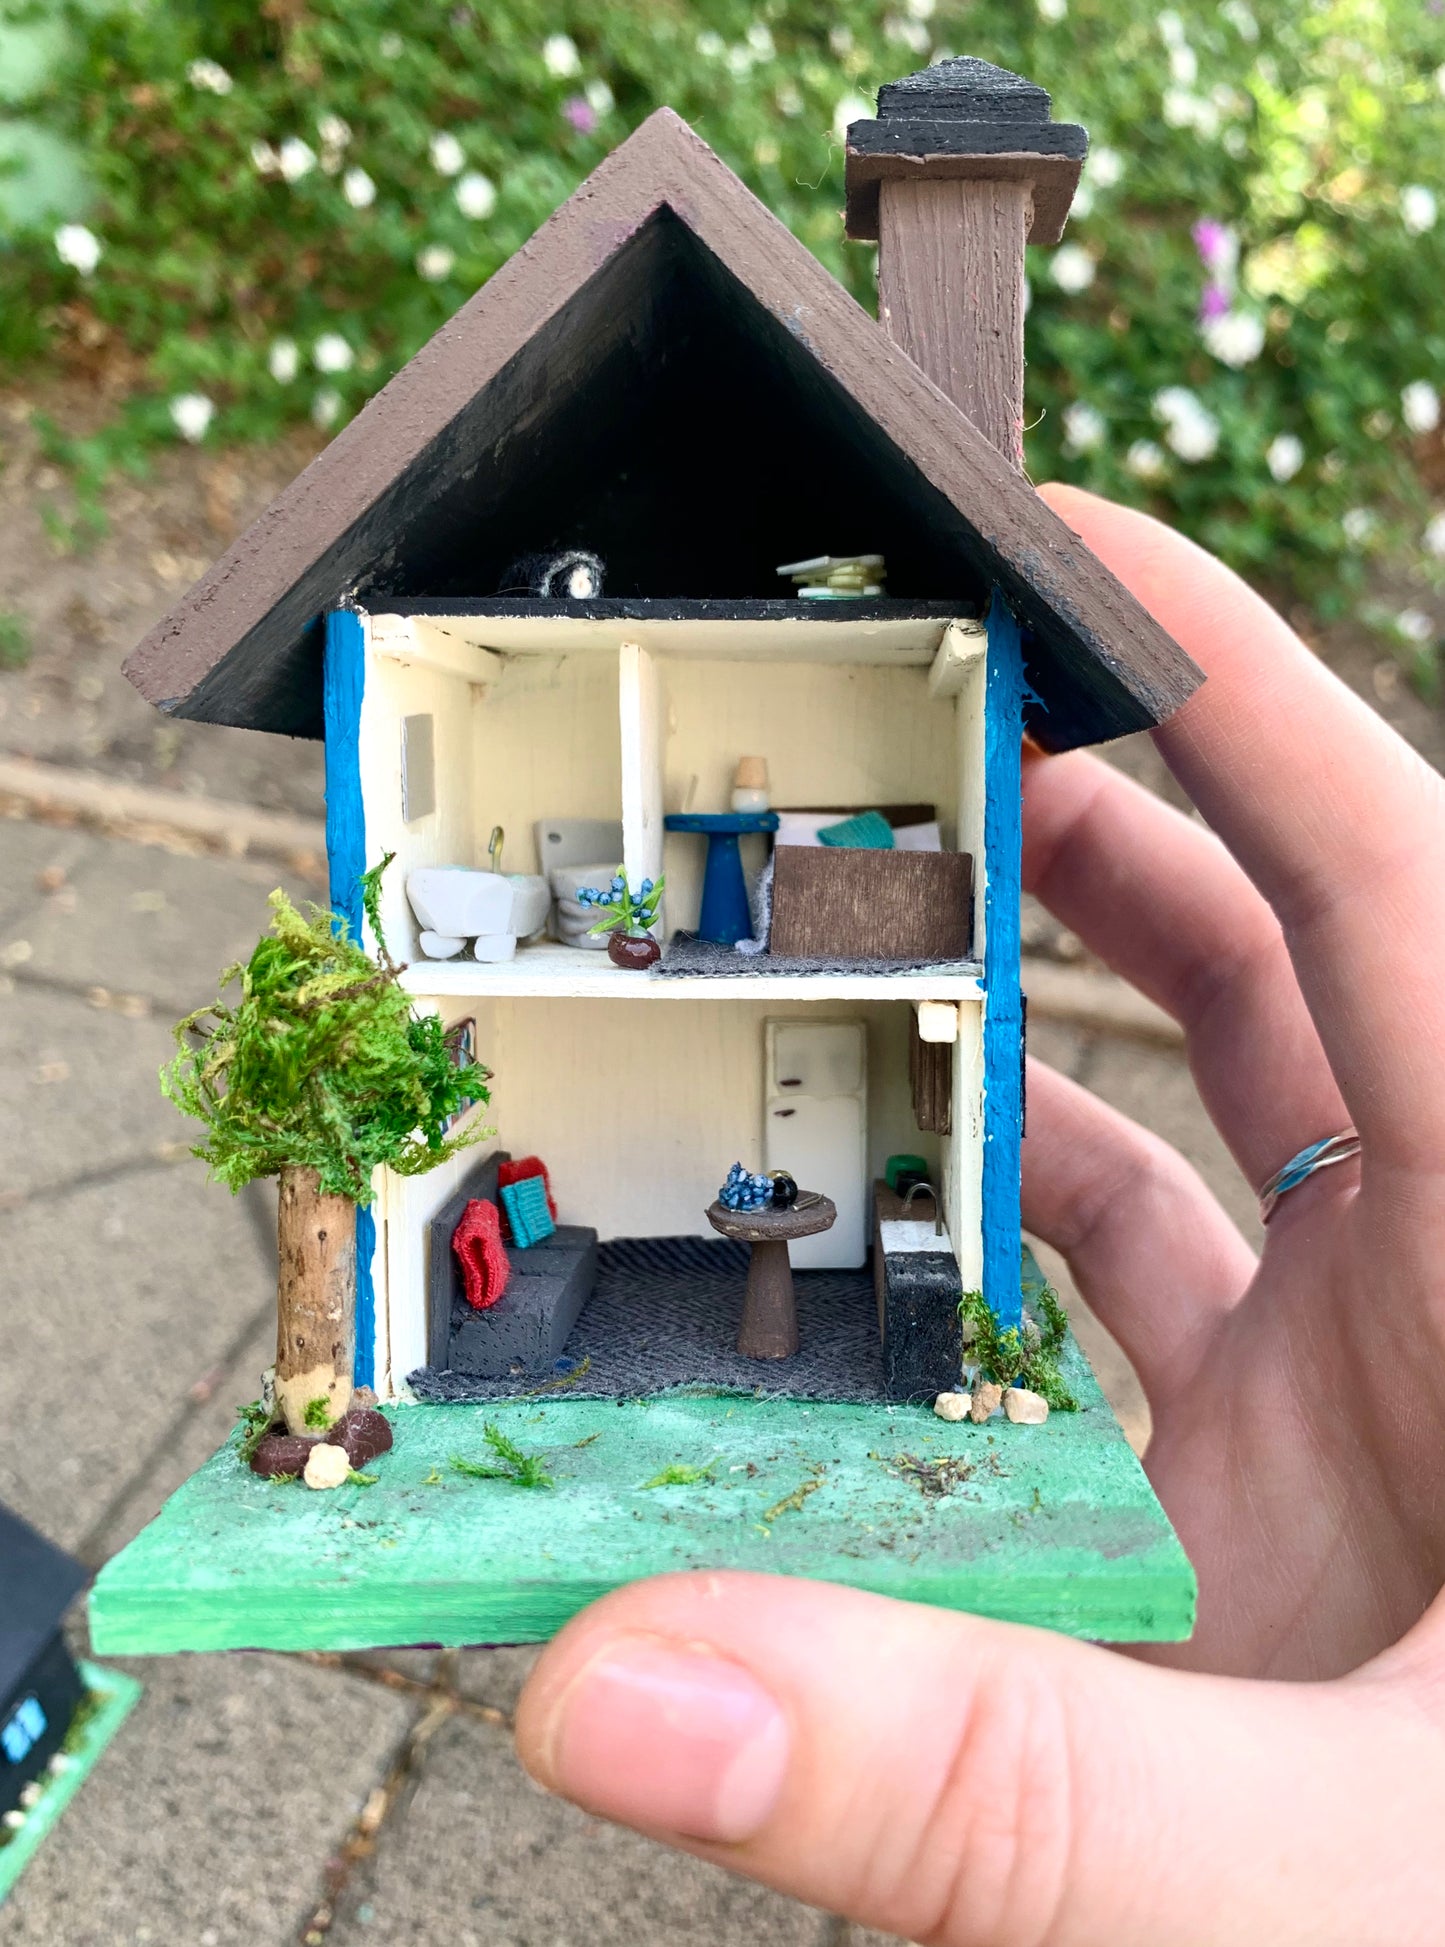 Miniature Tiny Doll House - Choose from Blue, Purple, or Black